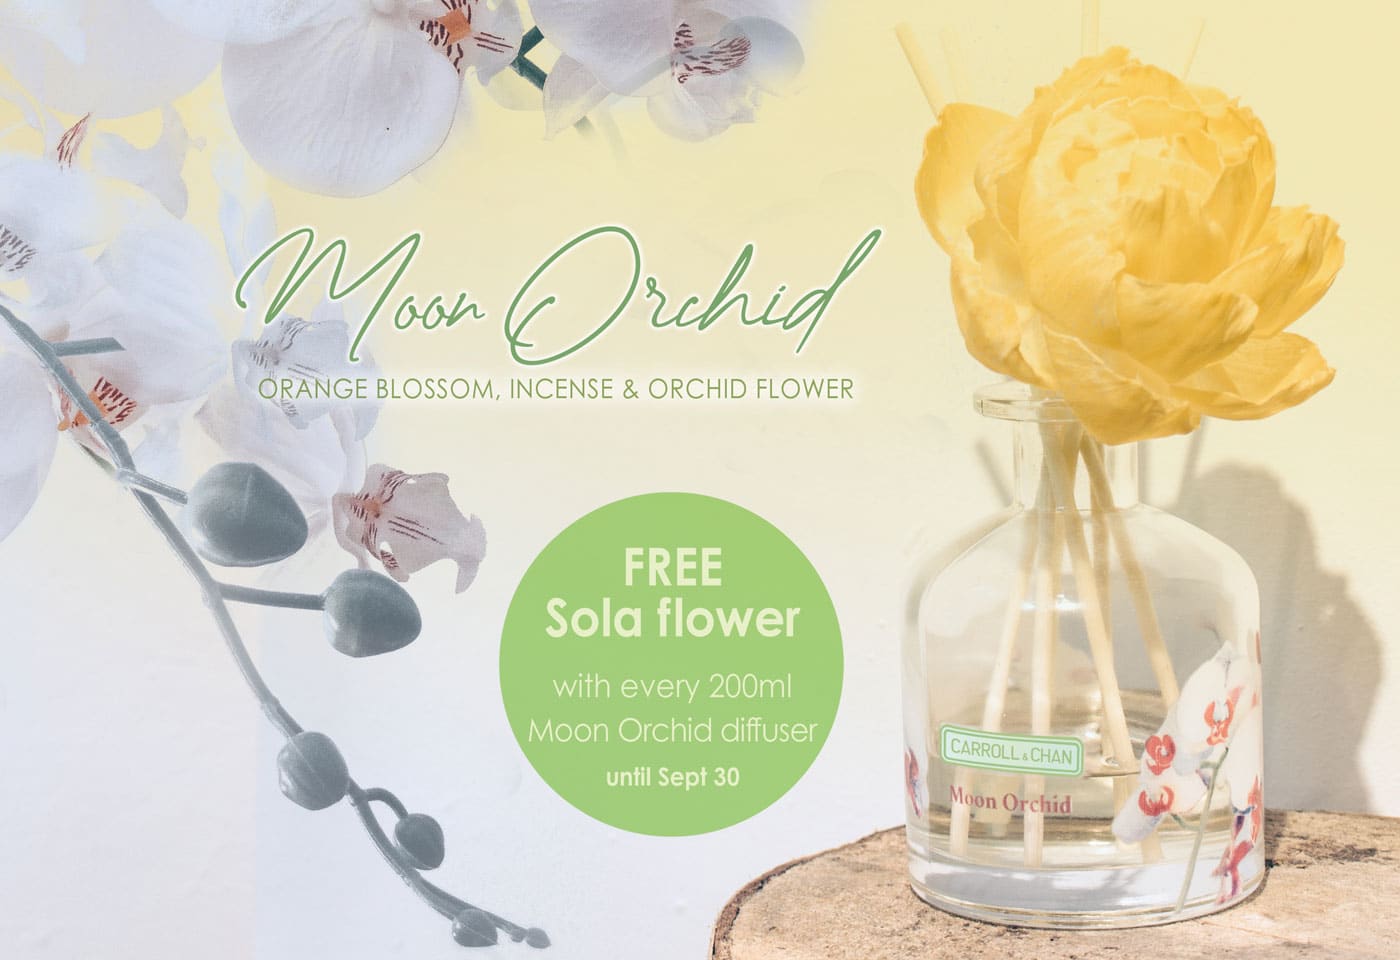 Moon Orchid Diffuser Offer